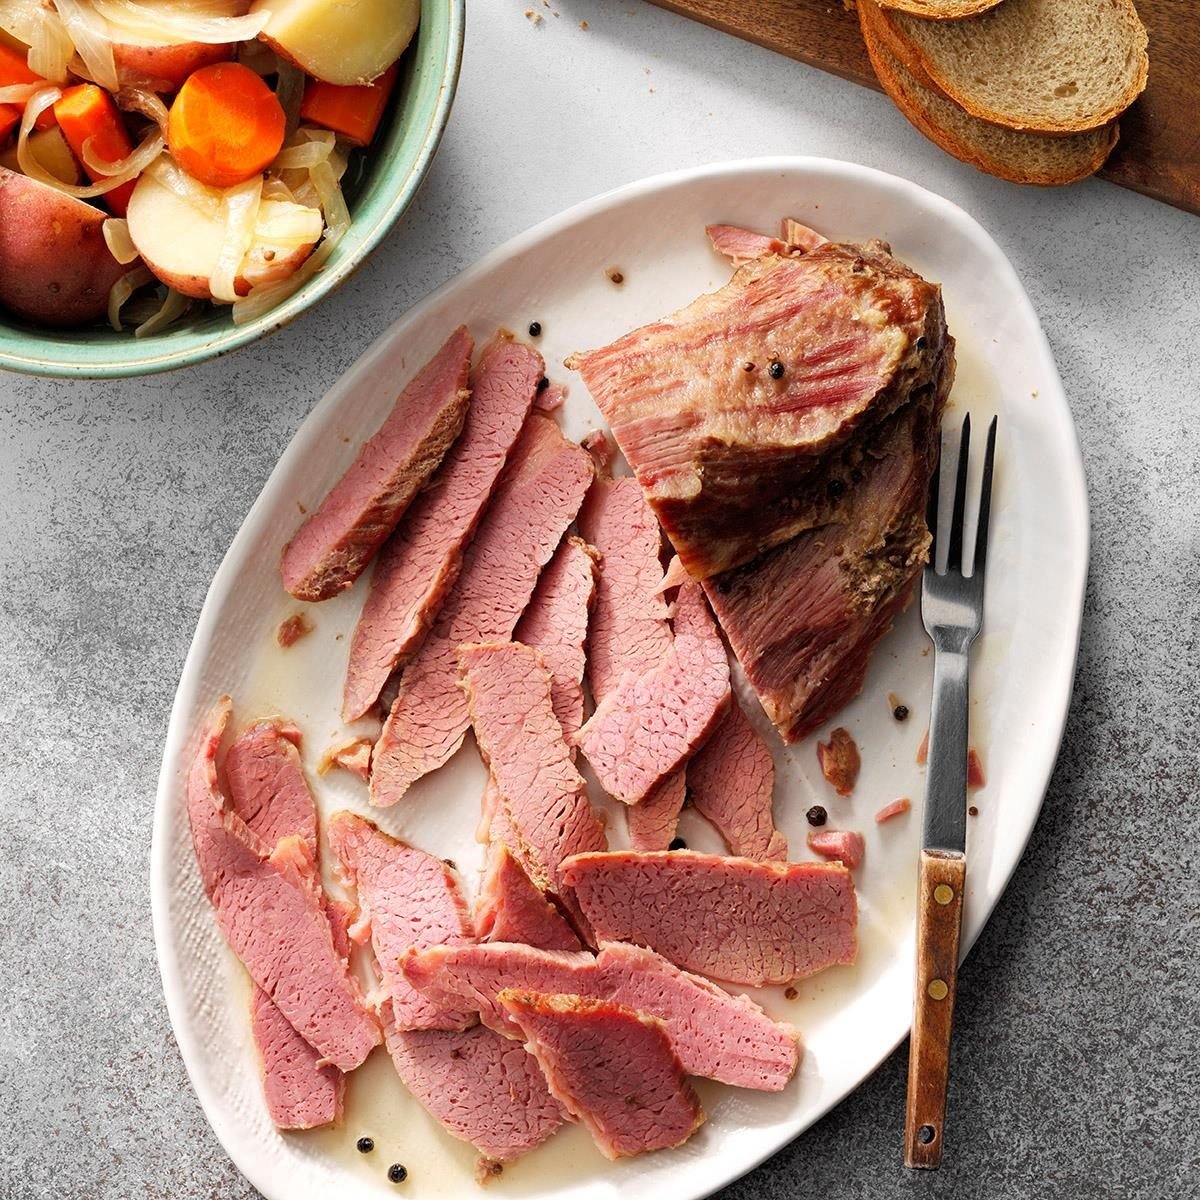 favourite slow cooker recipes - Slow-cooked corned beef